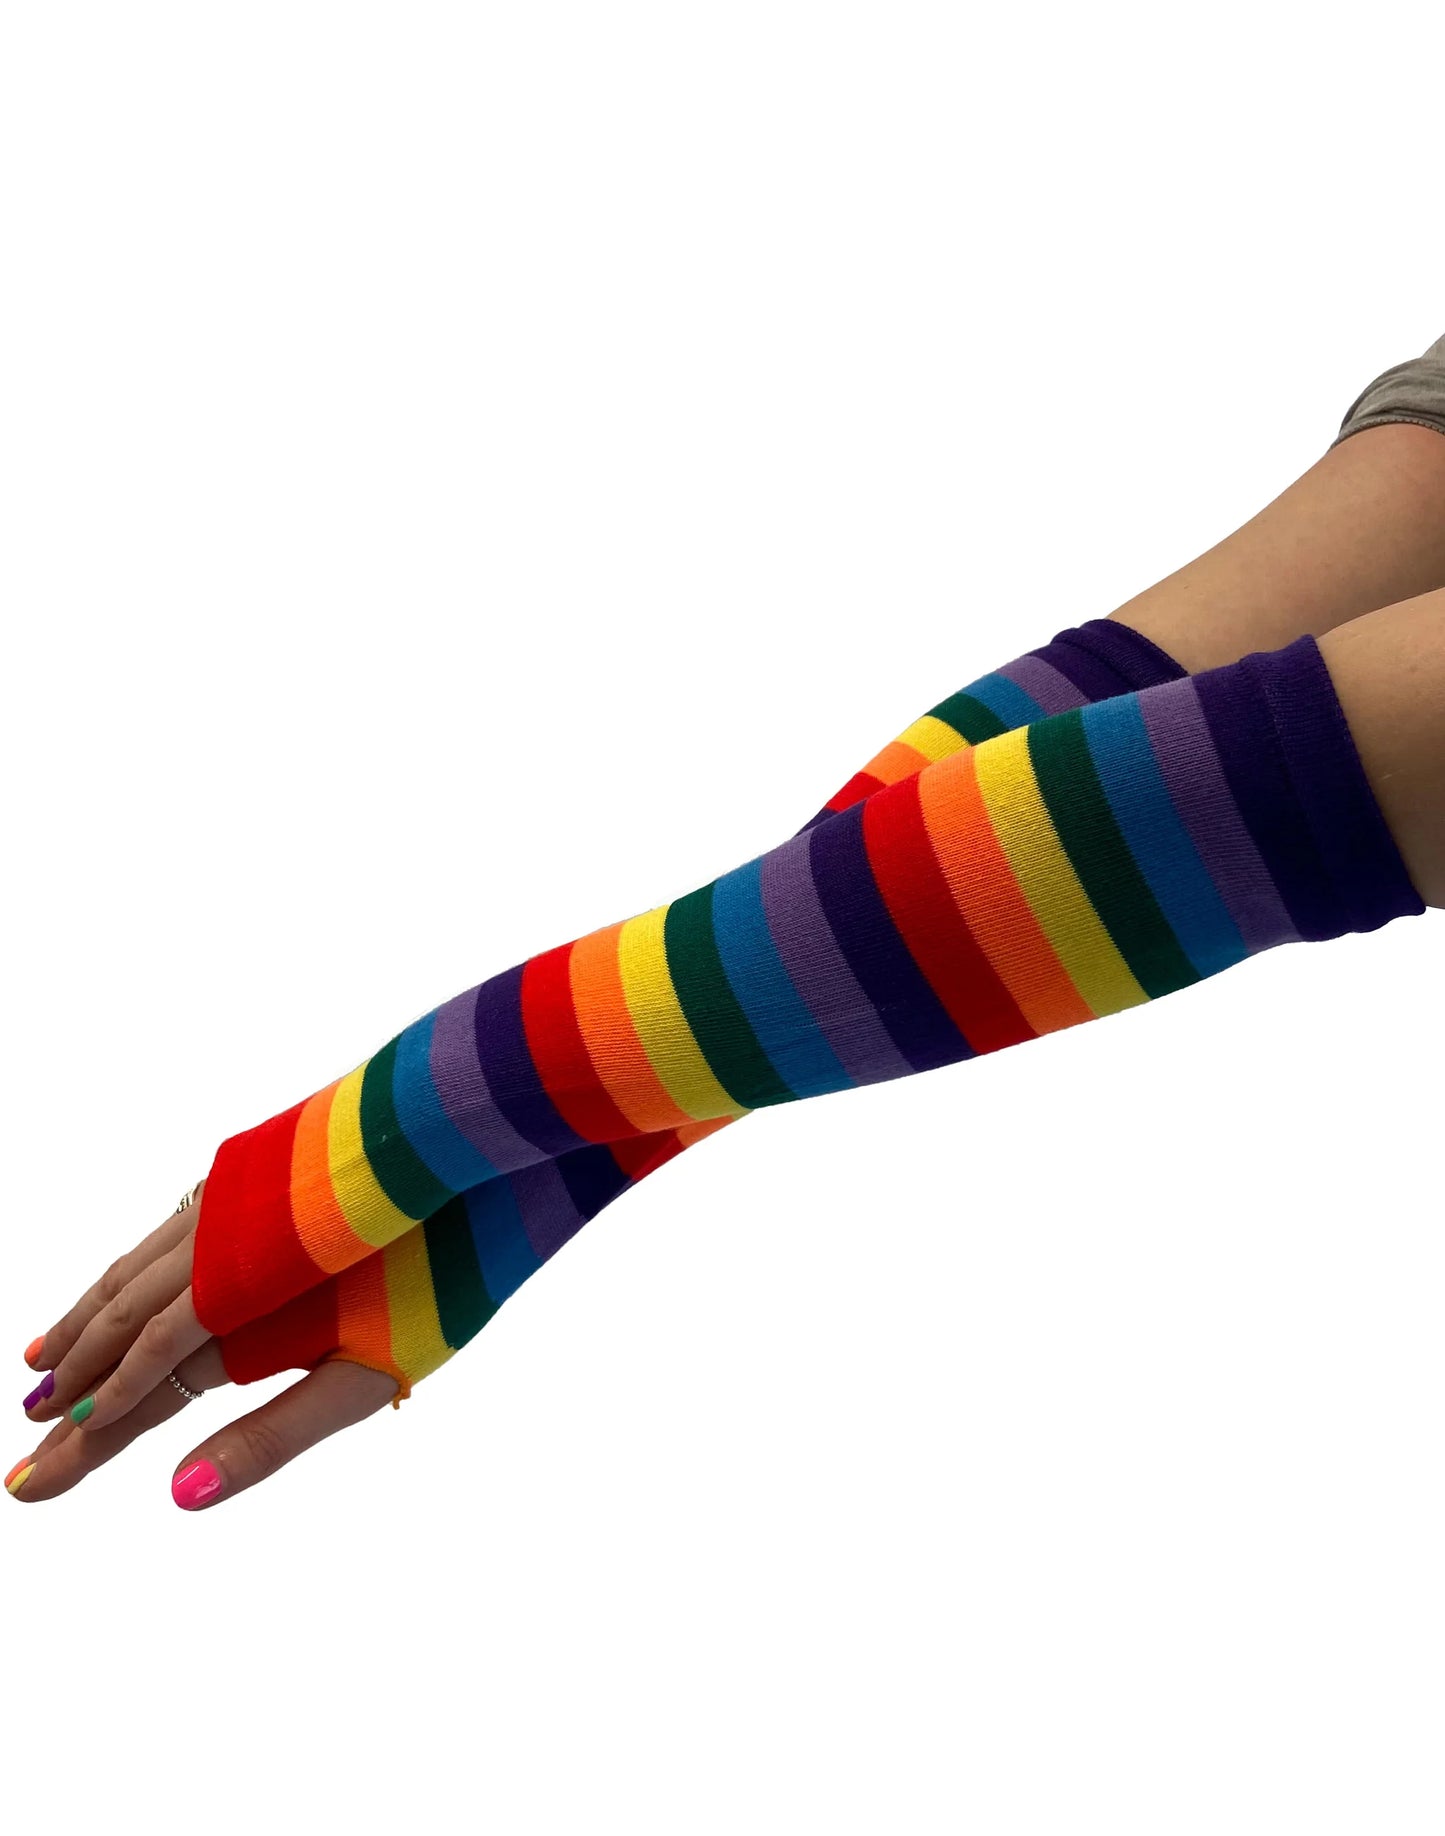 Pamela Mann Rainbow Stripe Sleevers - Multicoloured horizontal rainbow striped knitted tube arm sleeves with a hole for your thumb, can also be worn as a neat legwarmer.